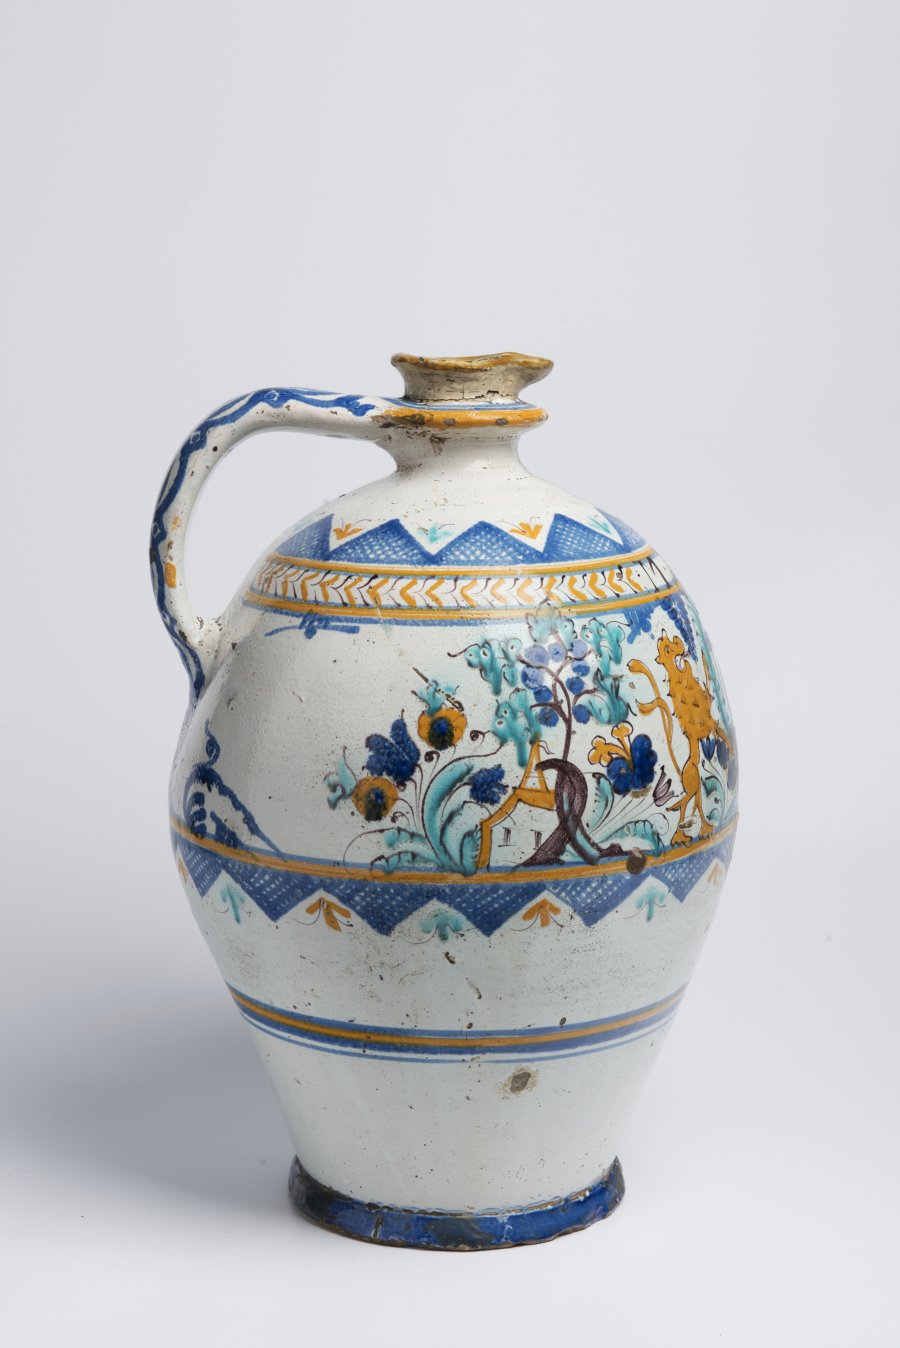 A POST-HABÁN JUG OF THE GUILD OF COOPERS